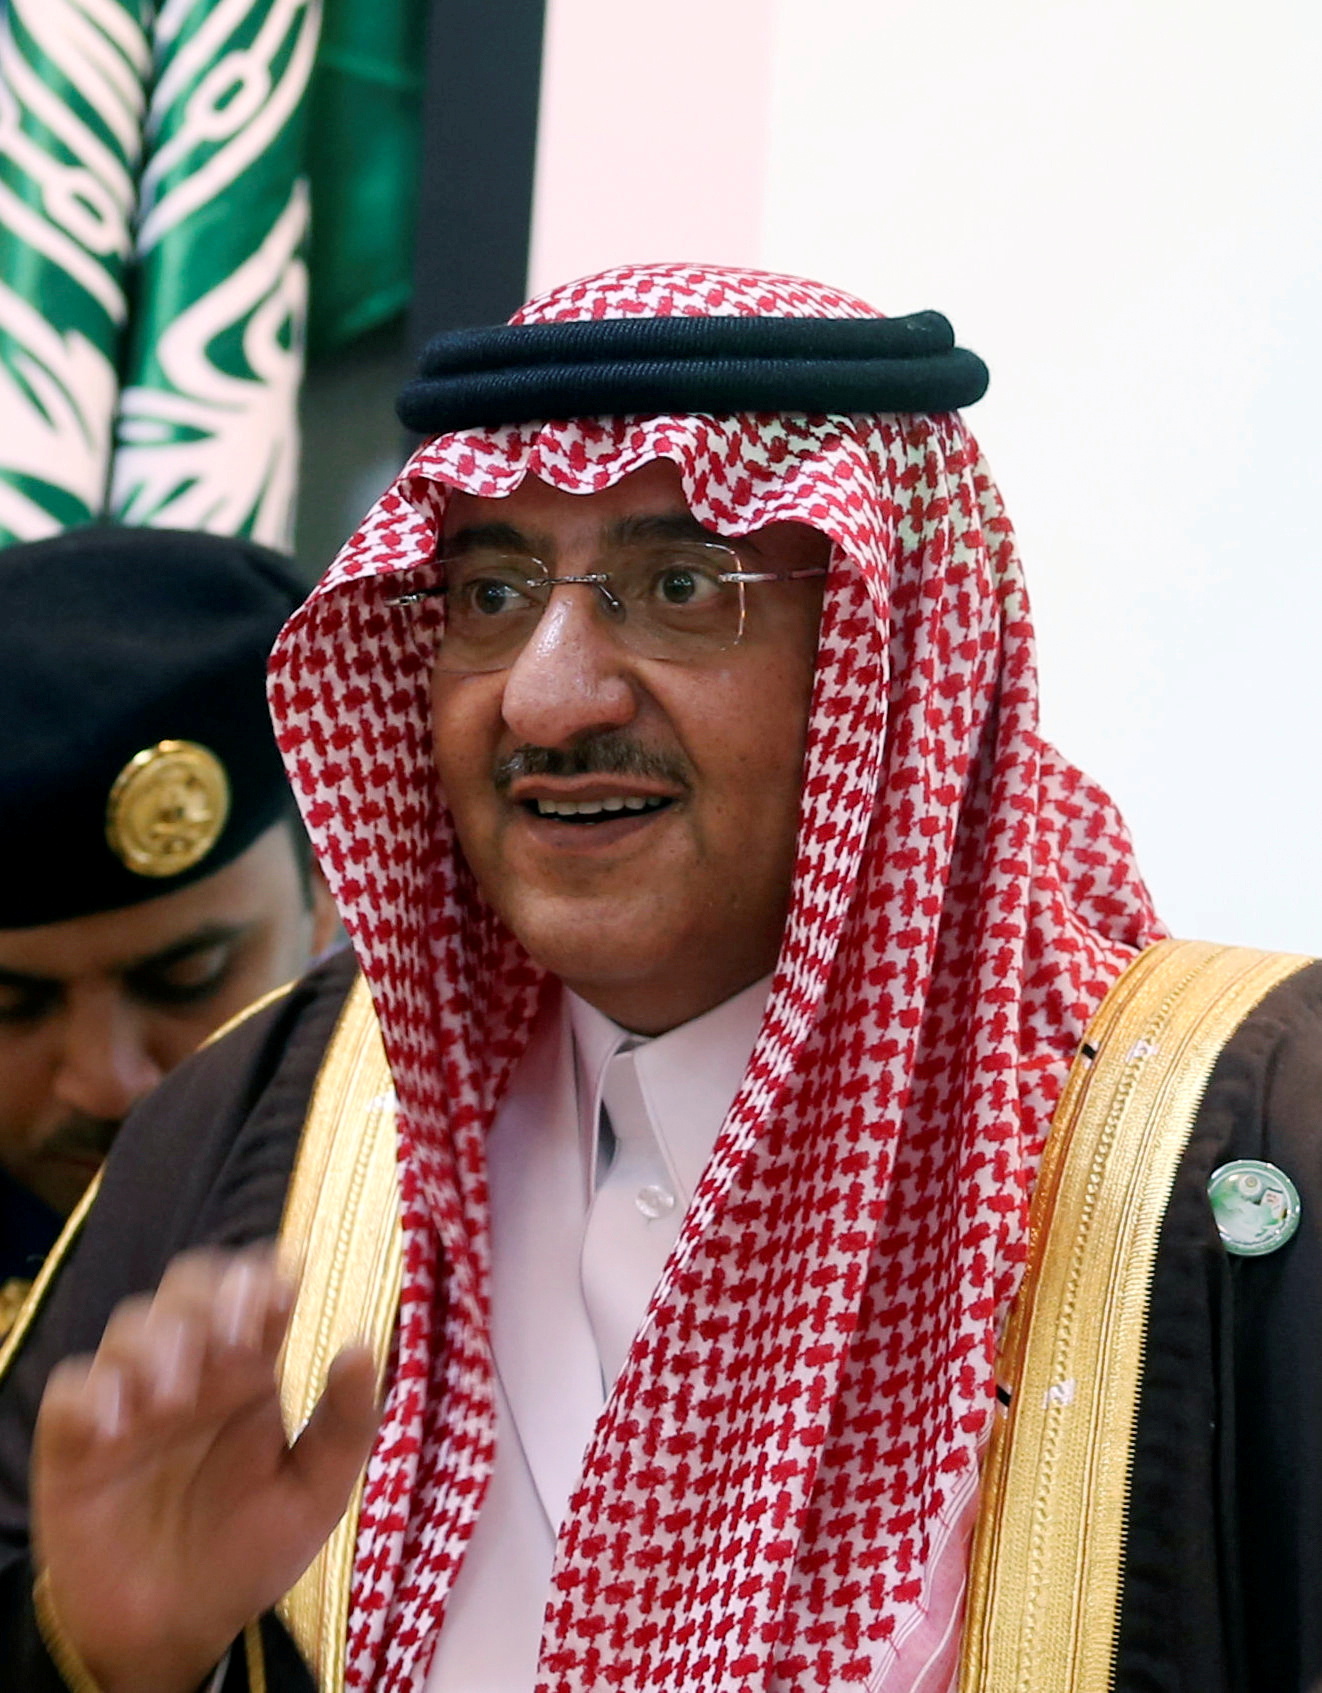 Saudi Crown Prince Mohammed Bin Nayef, the interior minister, attends the 34rd session of the Council of Arab Interior Ministers in Tunis,Tunisia April 5, 2017.REUTERS/Zoubeir Souissi/File Photo